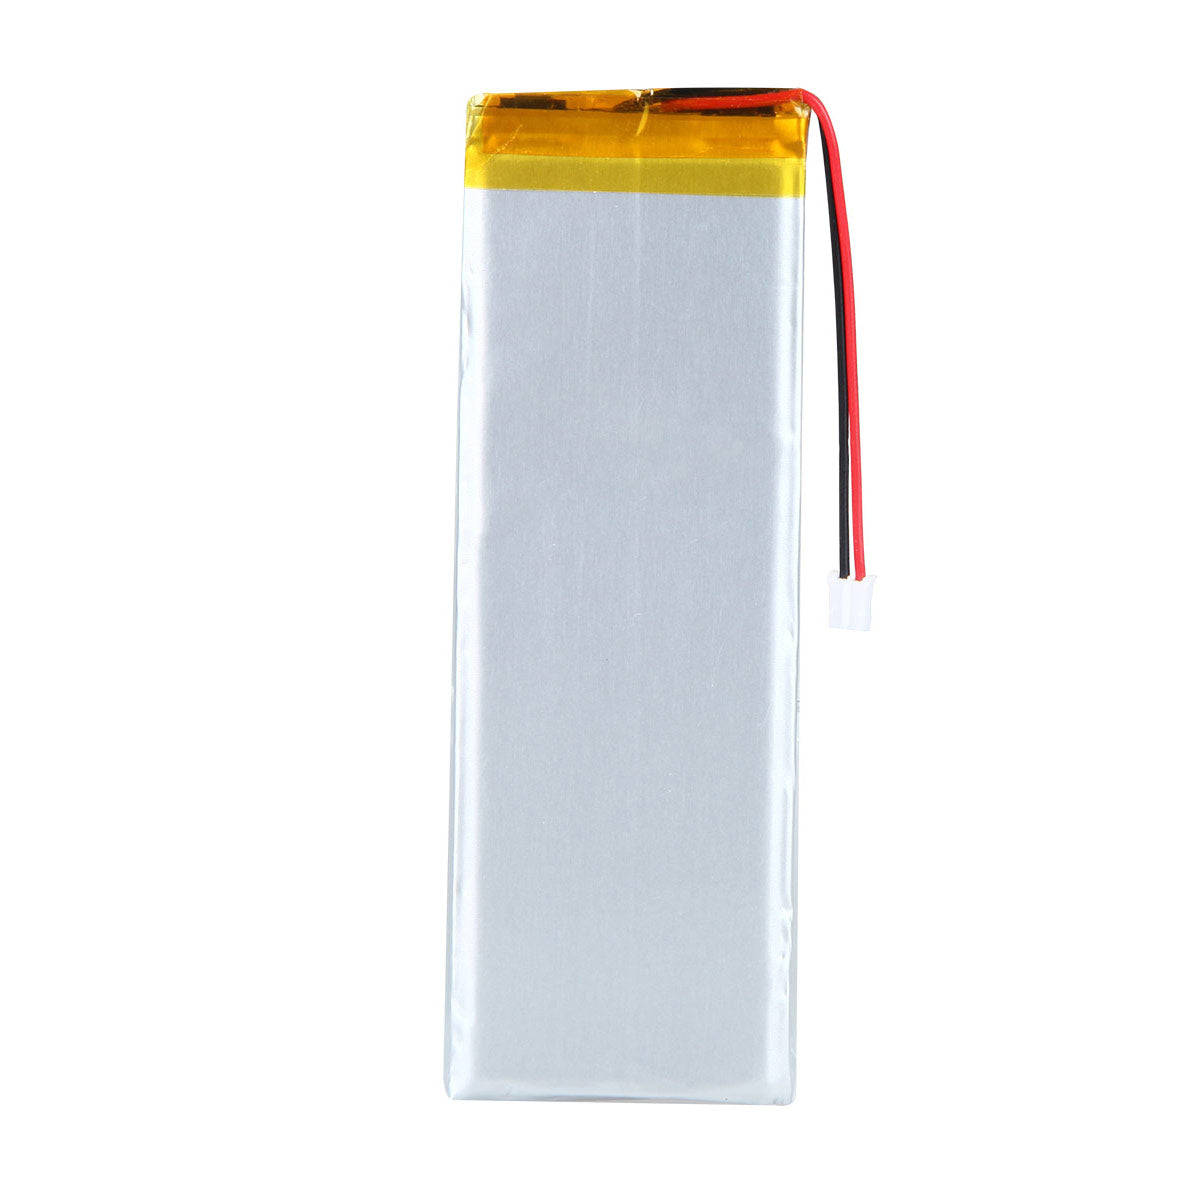 3.7V 2850mAh 6034106 Rechargeable Lithium Polymer Battery